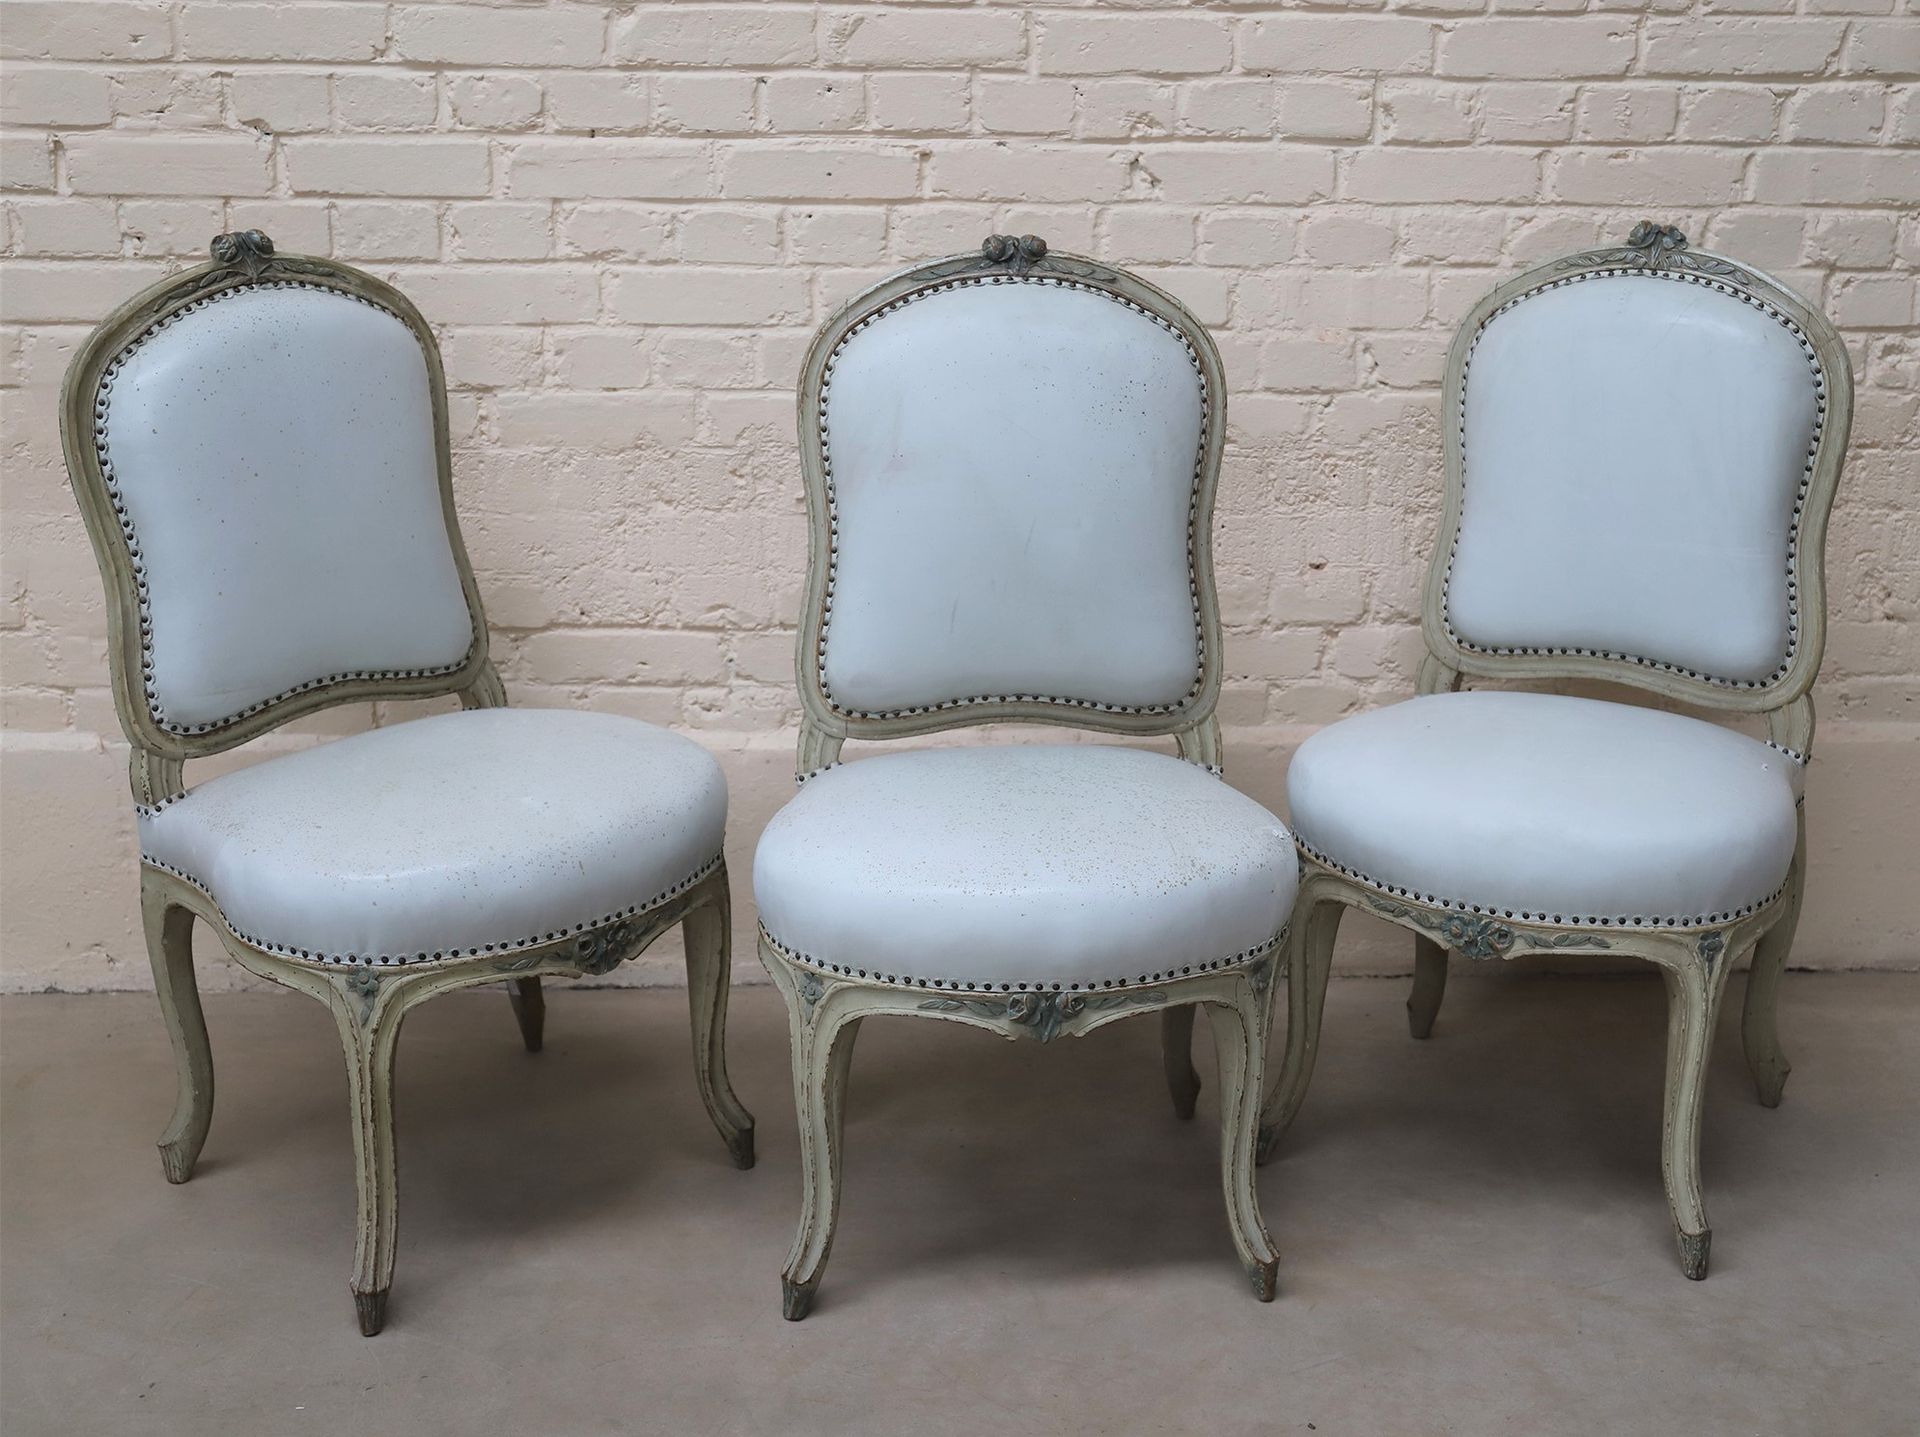 Null SET OF 3 CHAIRS by François GENY (1731 -1804), received Master in 1773

Gre&hellip;